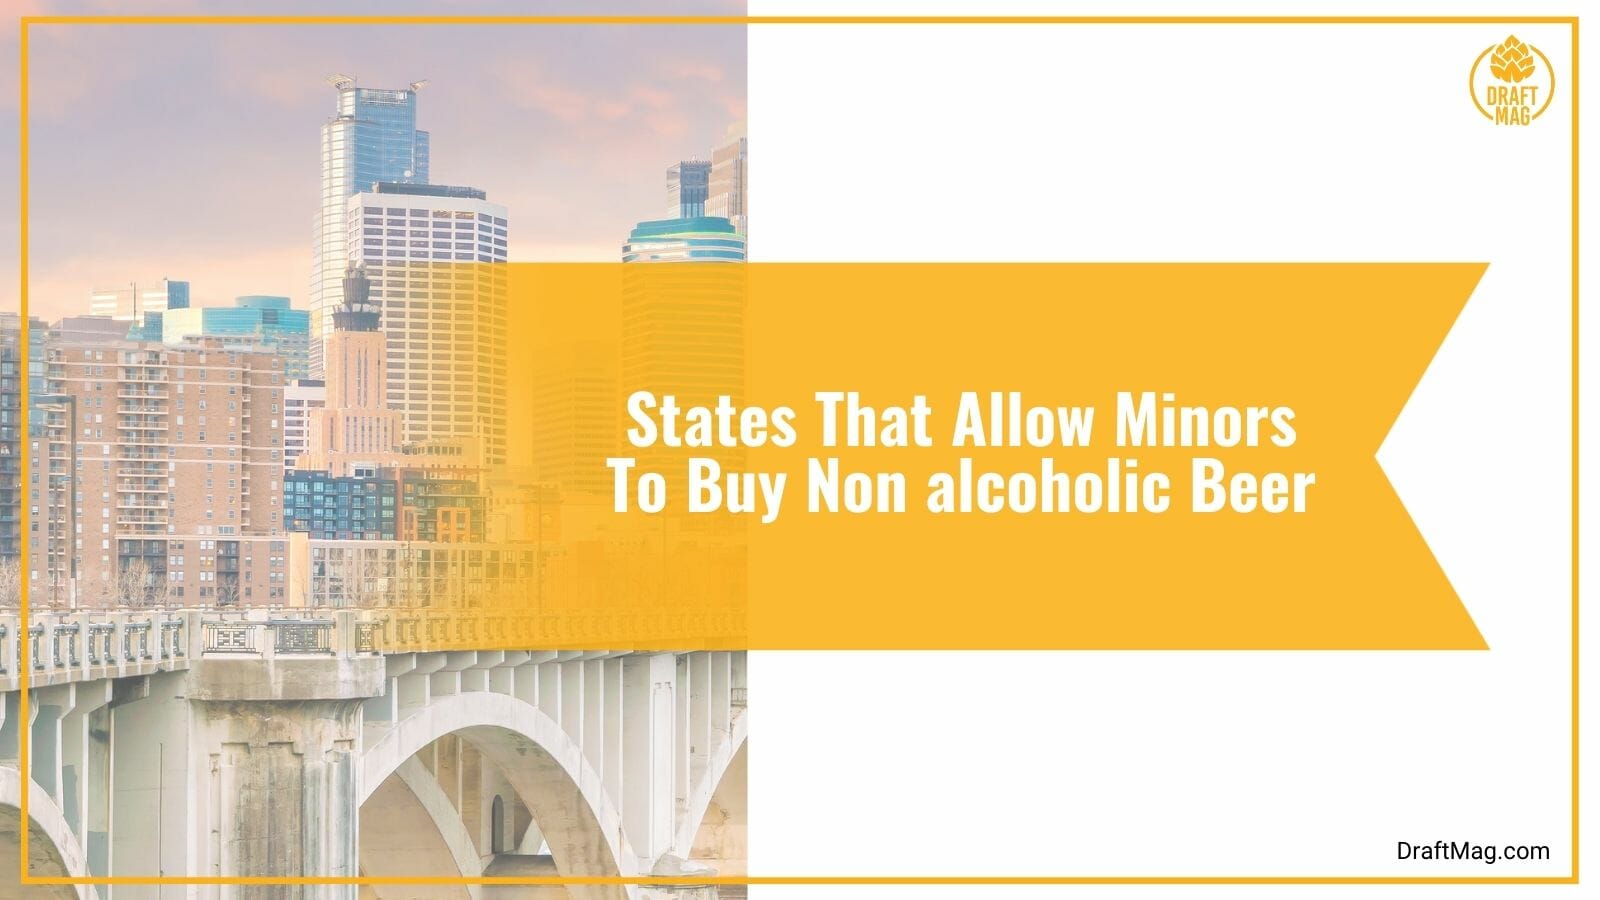 States That Allow Minors To Buy Non-alcoholic Beer